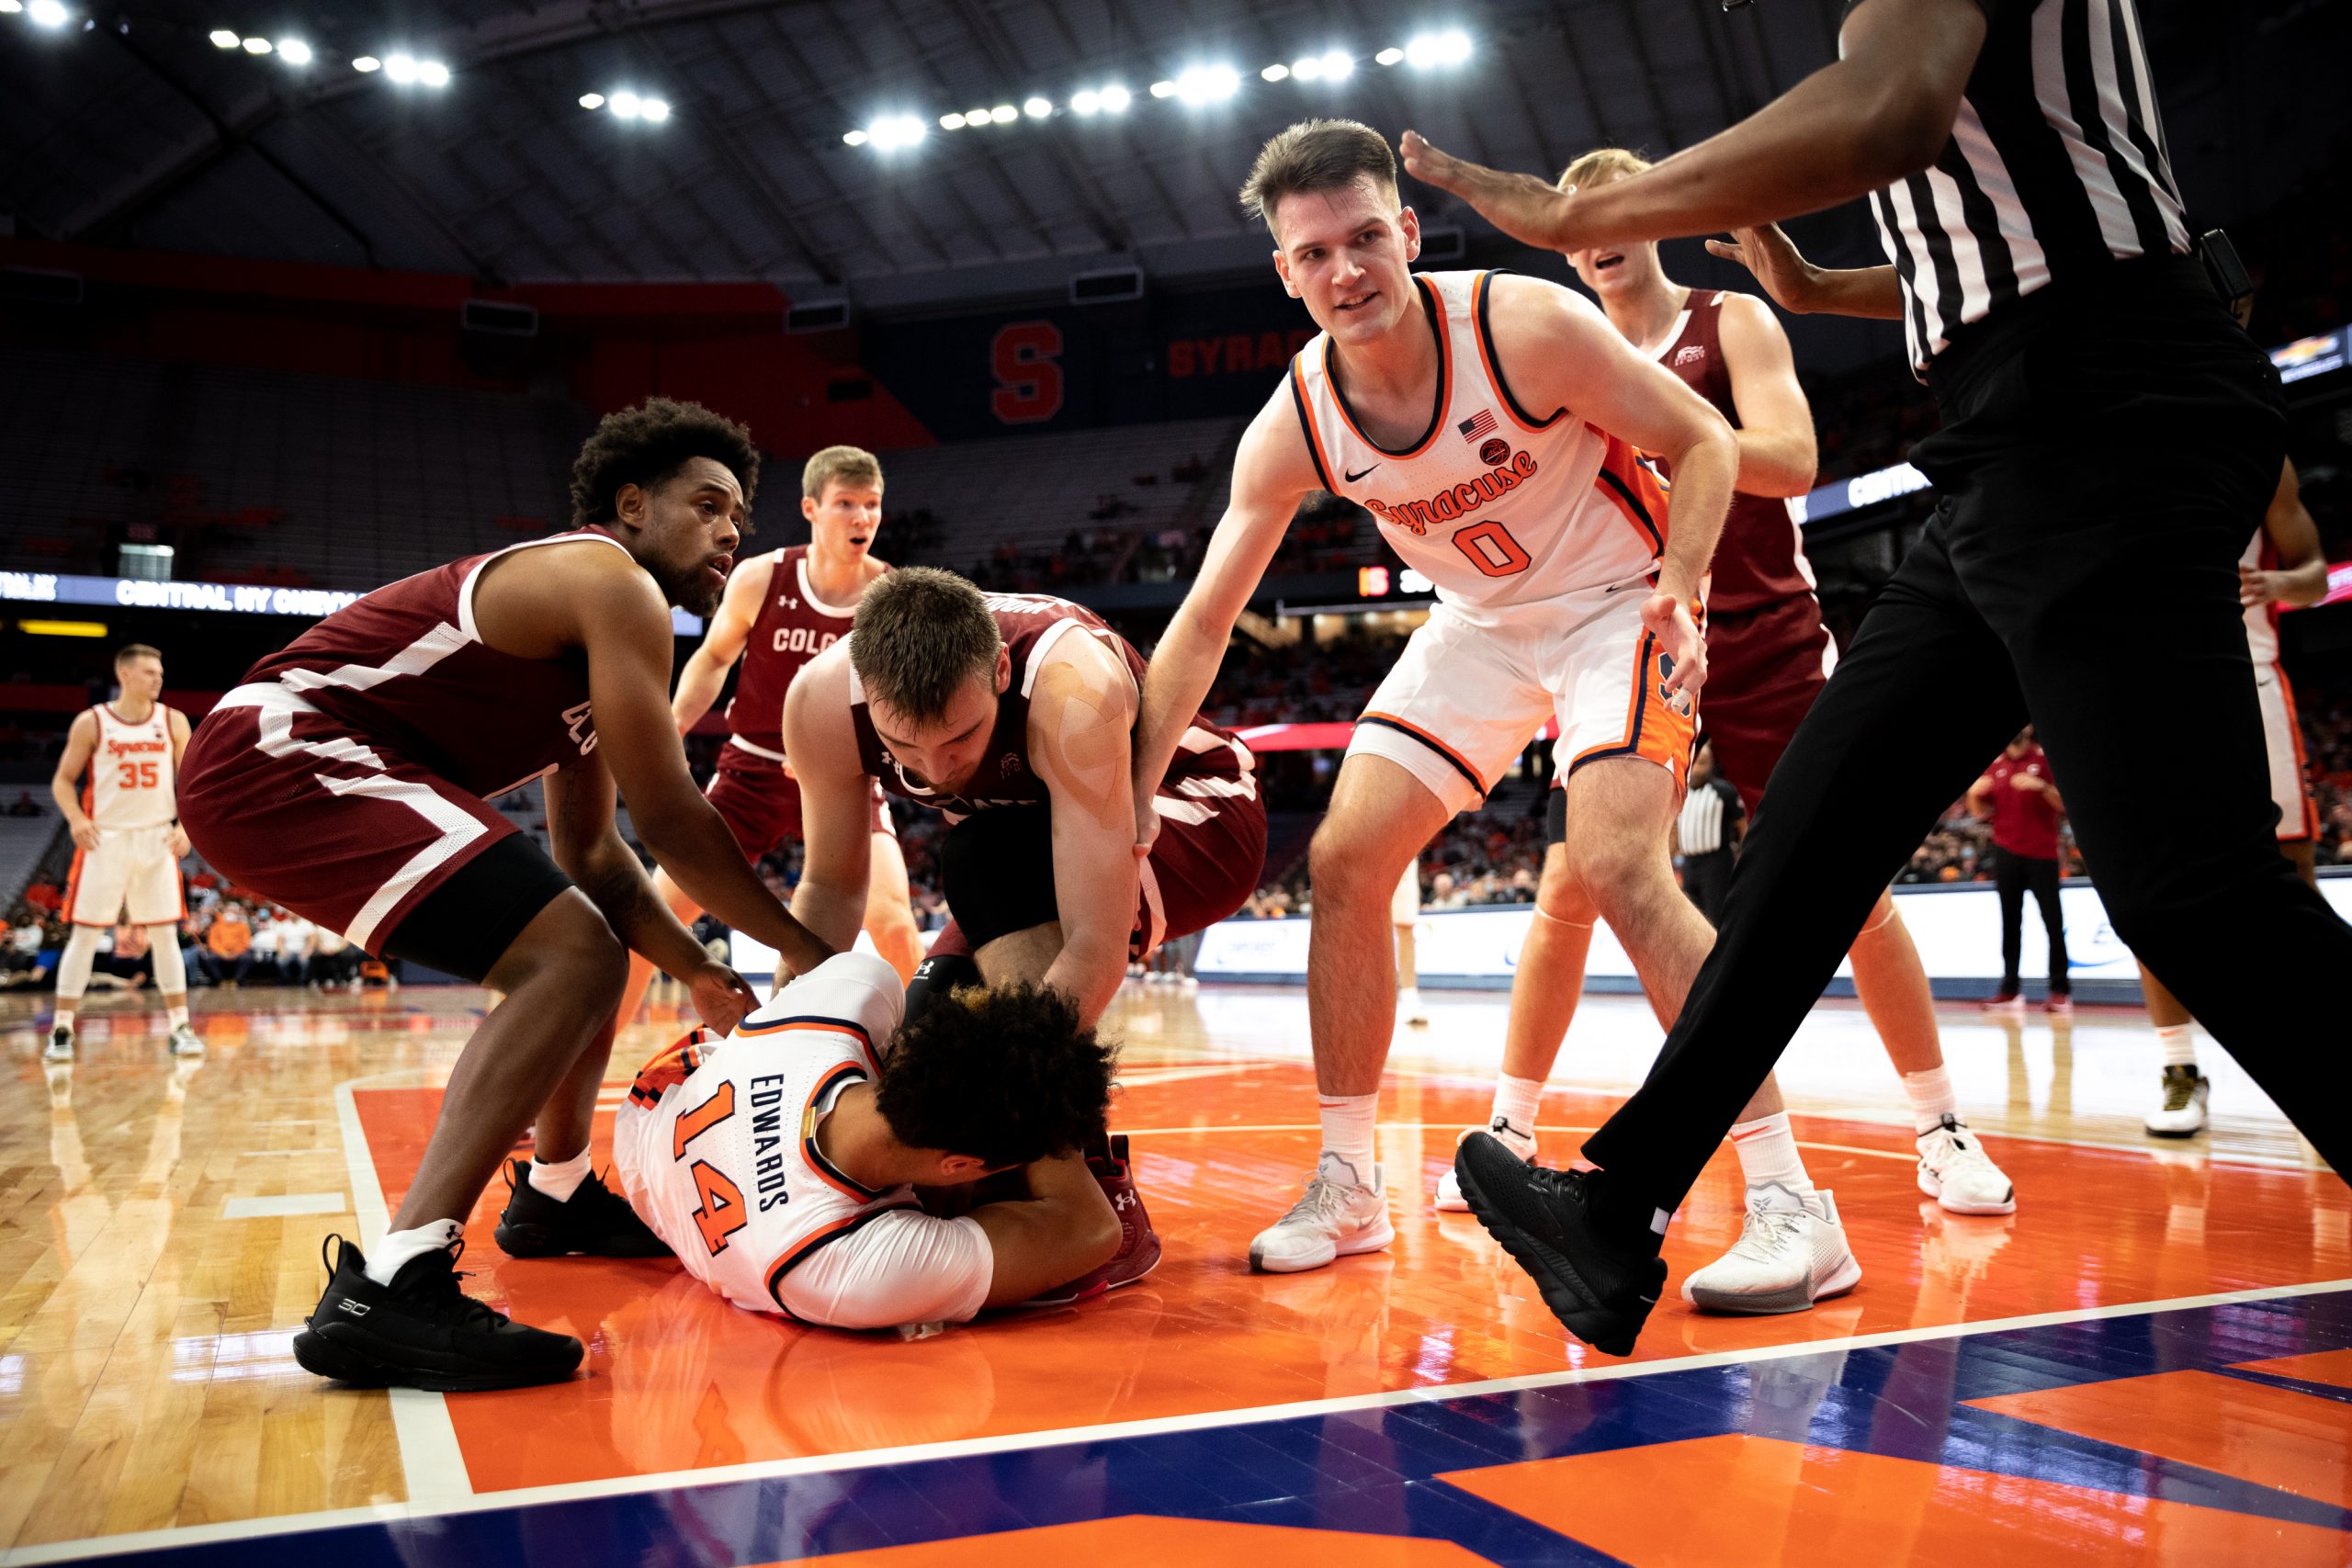 Jessie Edwards fends off Colgate players whiile Jimmy Boeheim watches on in the Orange's Nov. 20, 2021, loss in the Dome.